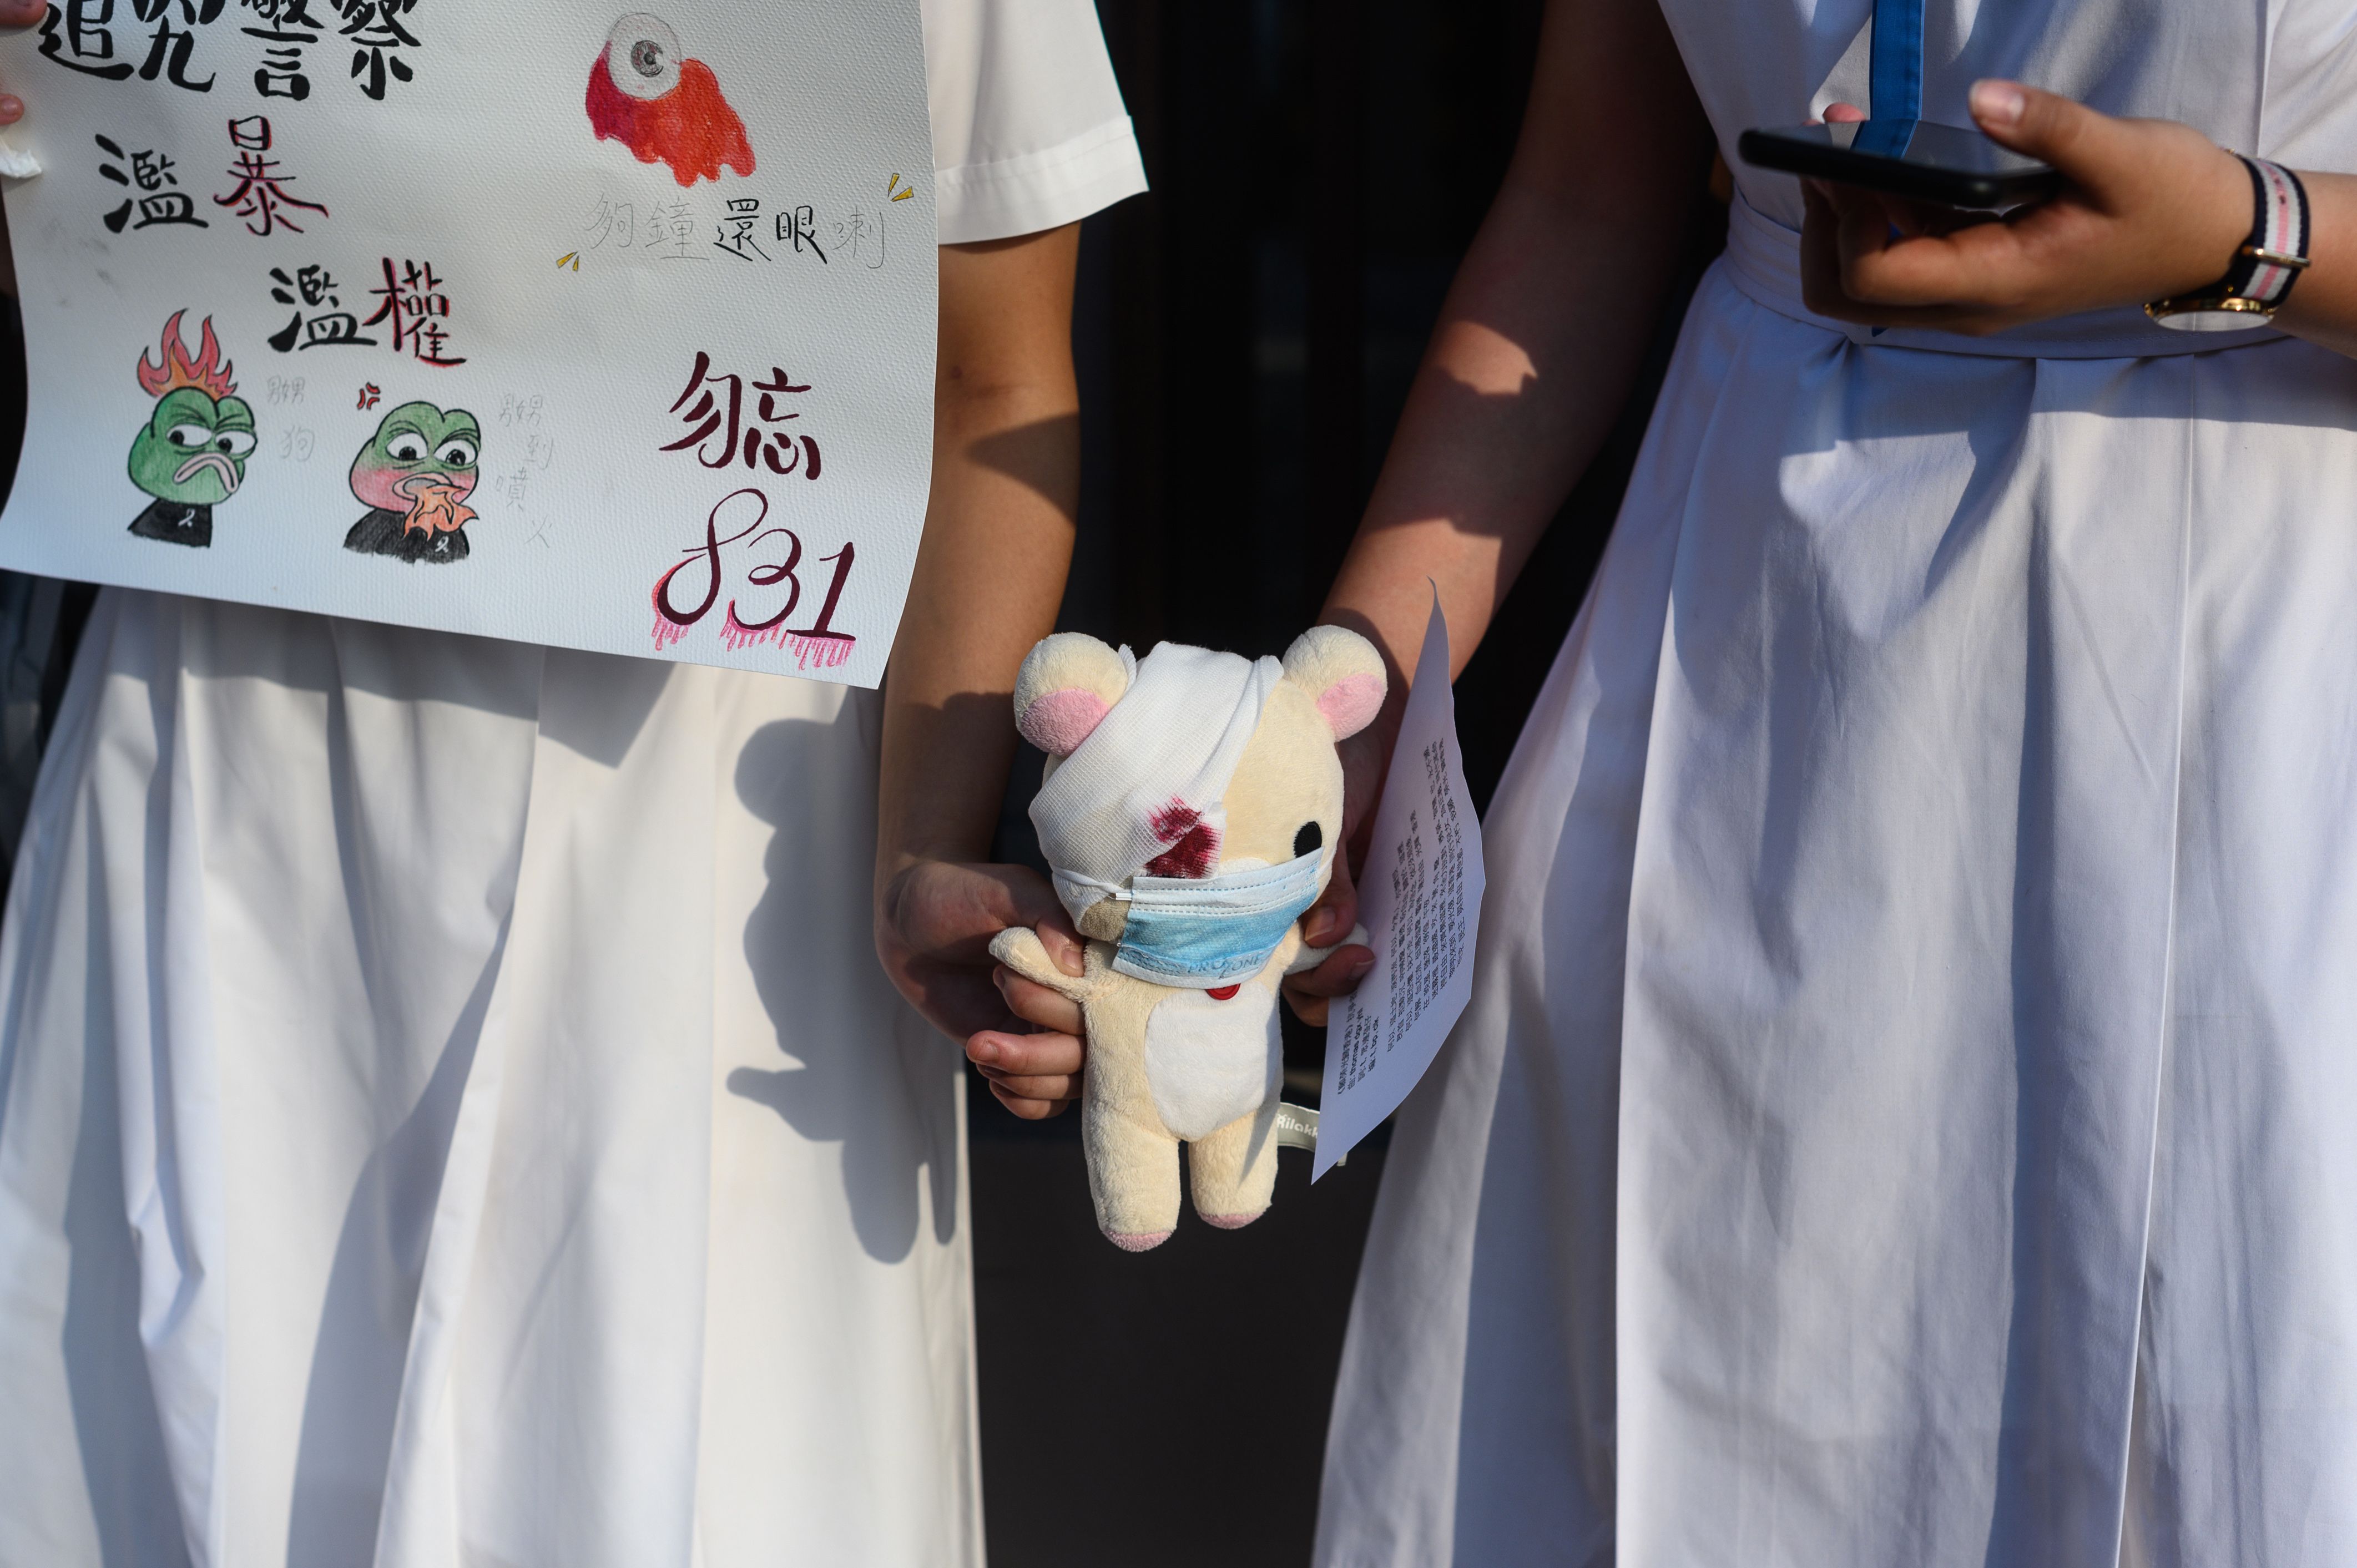 High school students and alumni form a human chain during a rally in the Sha Tin district of Hong Kong 